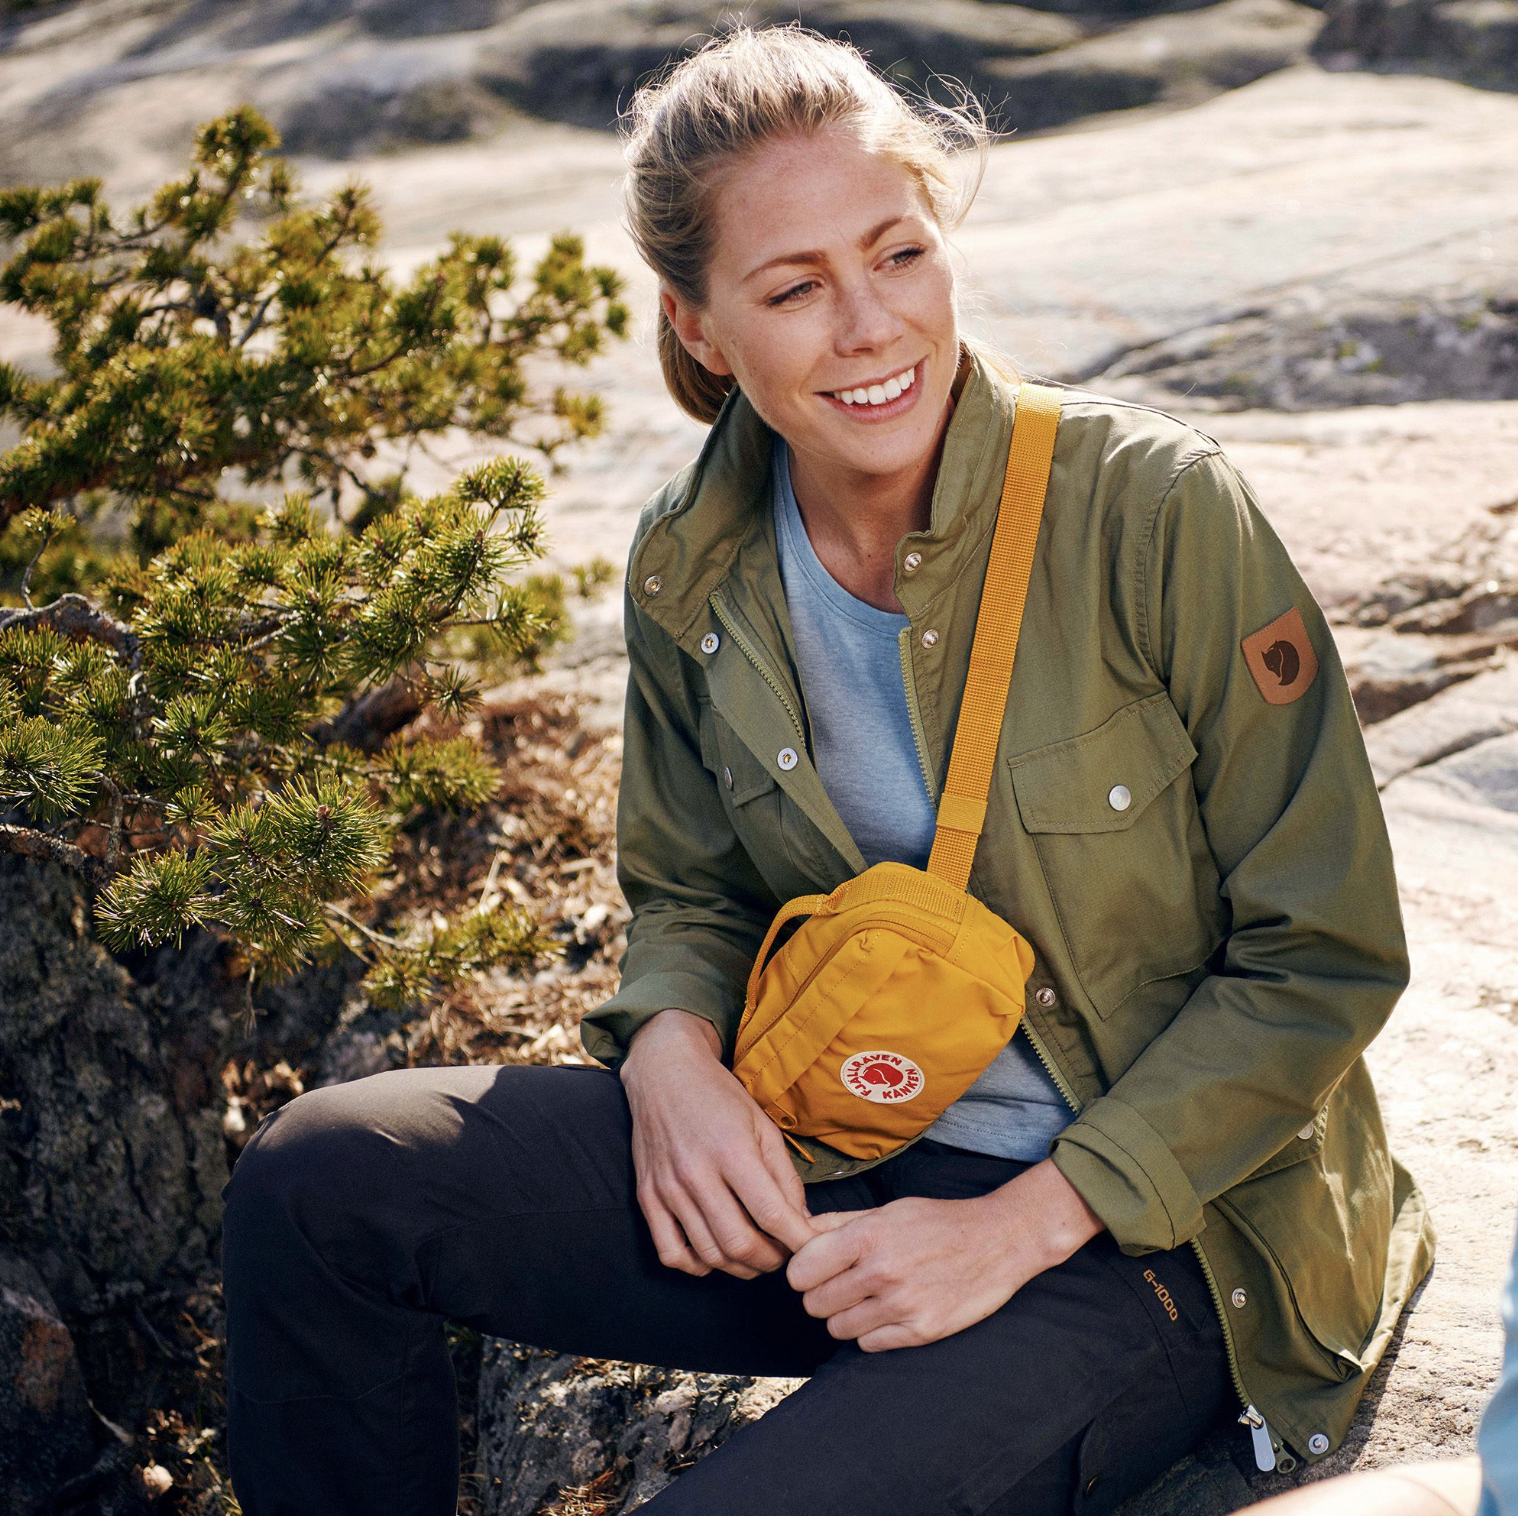 A person witting on a rock, wearing hiking gear and the hip pack